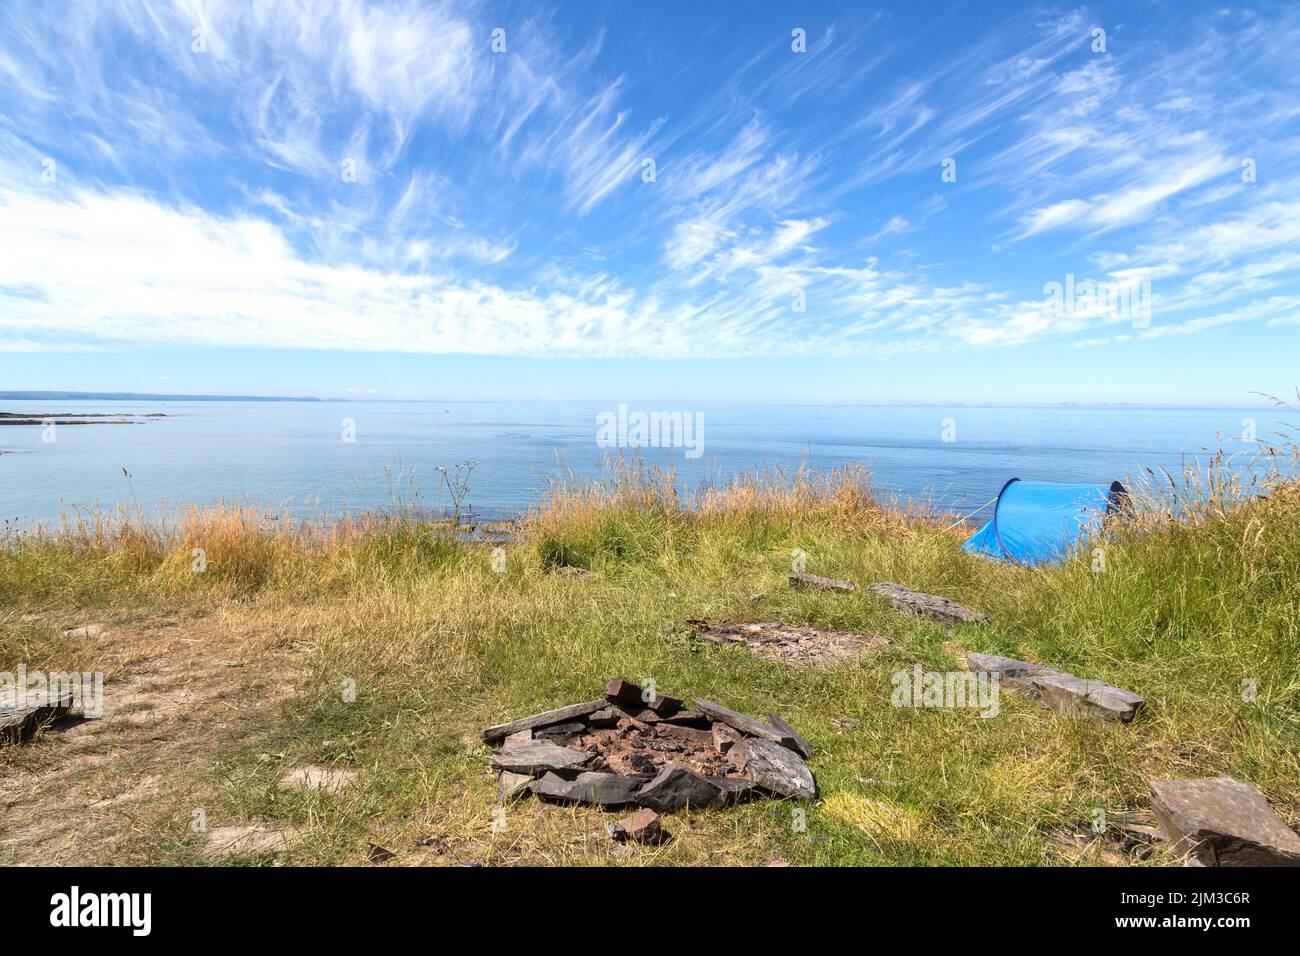 A scenic view of the sea from a large hill or mountain where a tent has been pitched, Adventure holiday, wild camping, outdoor activity concept. Stock Photo